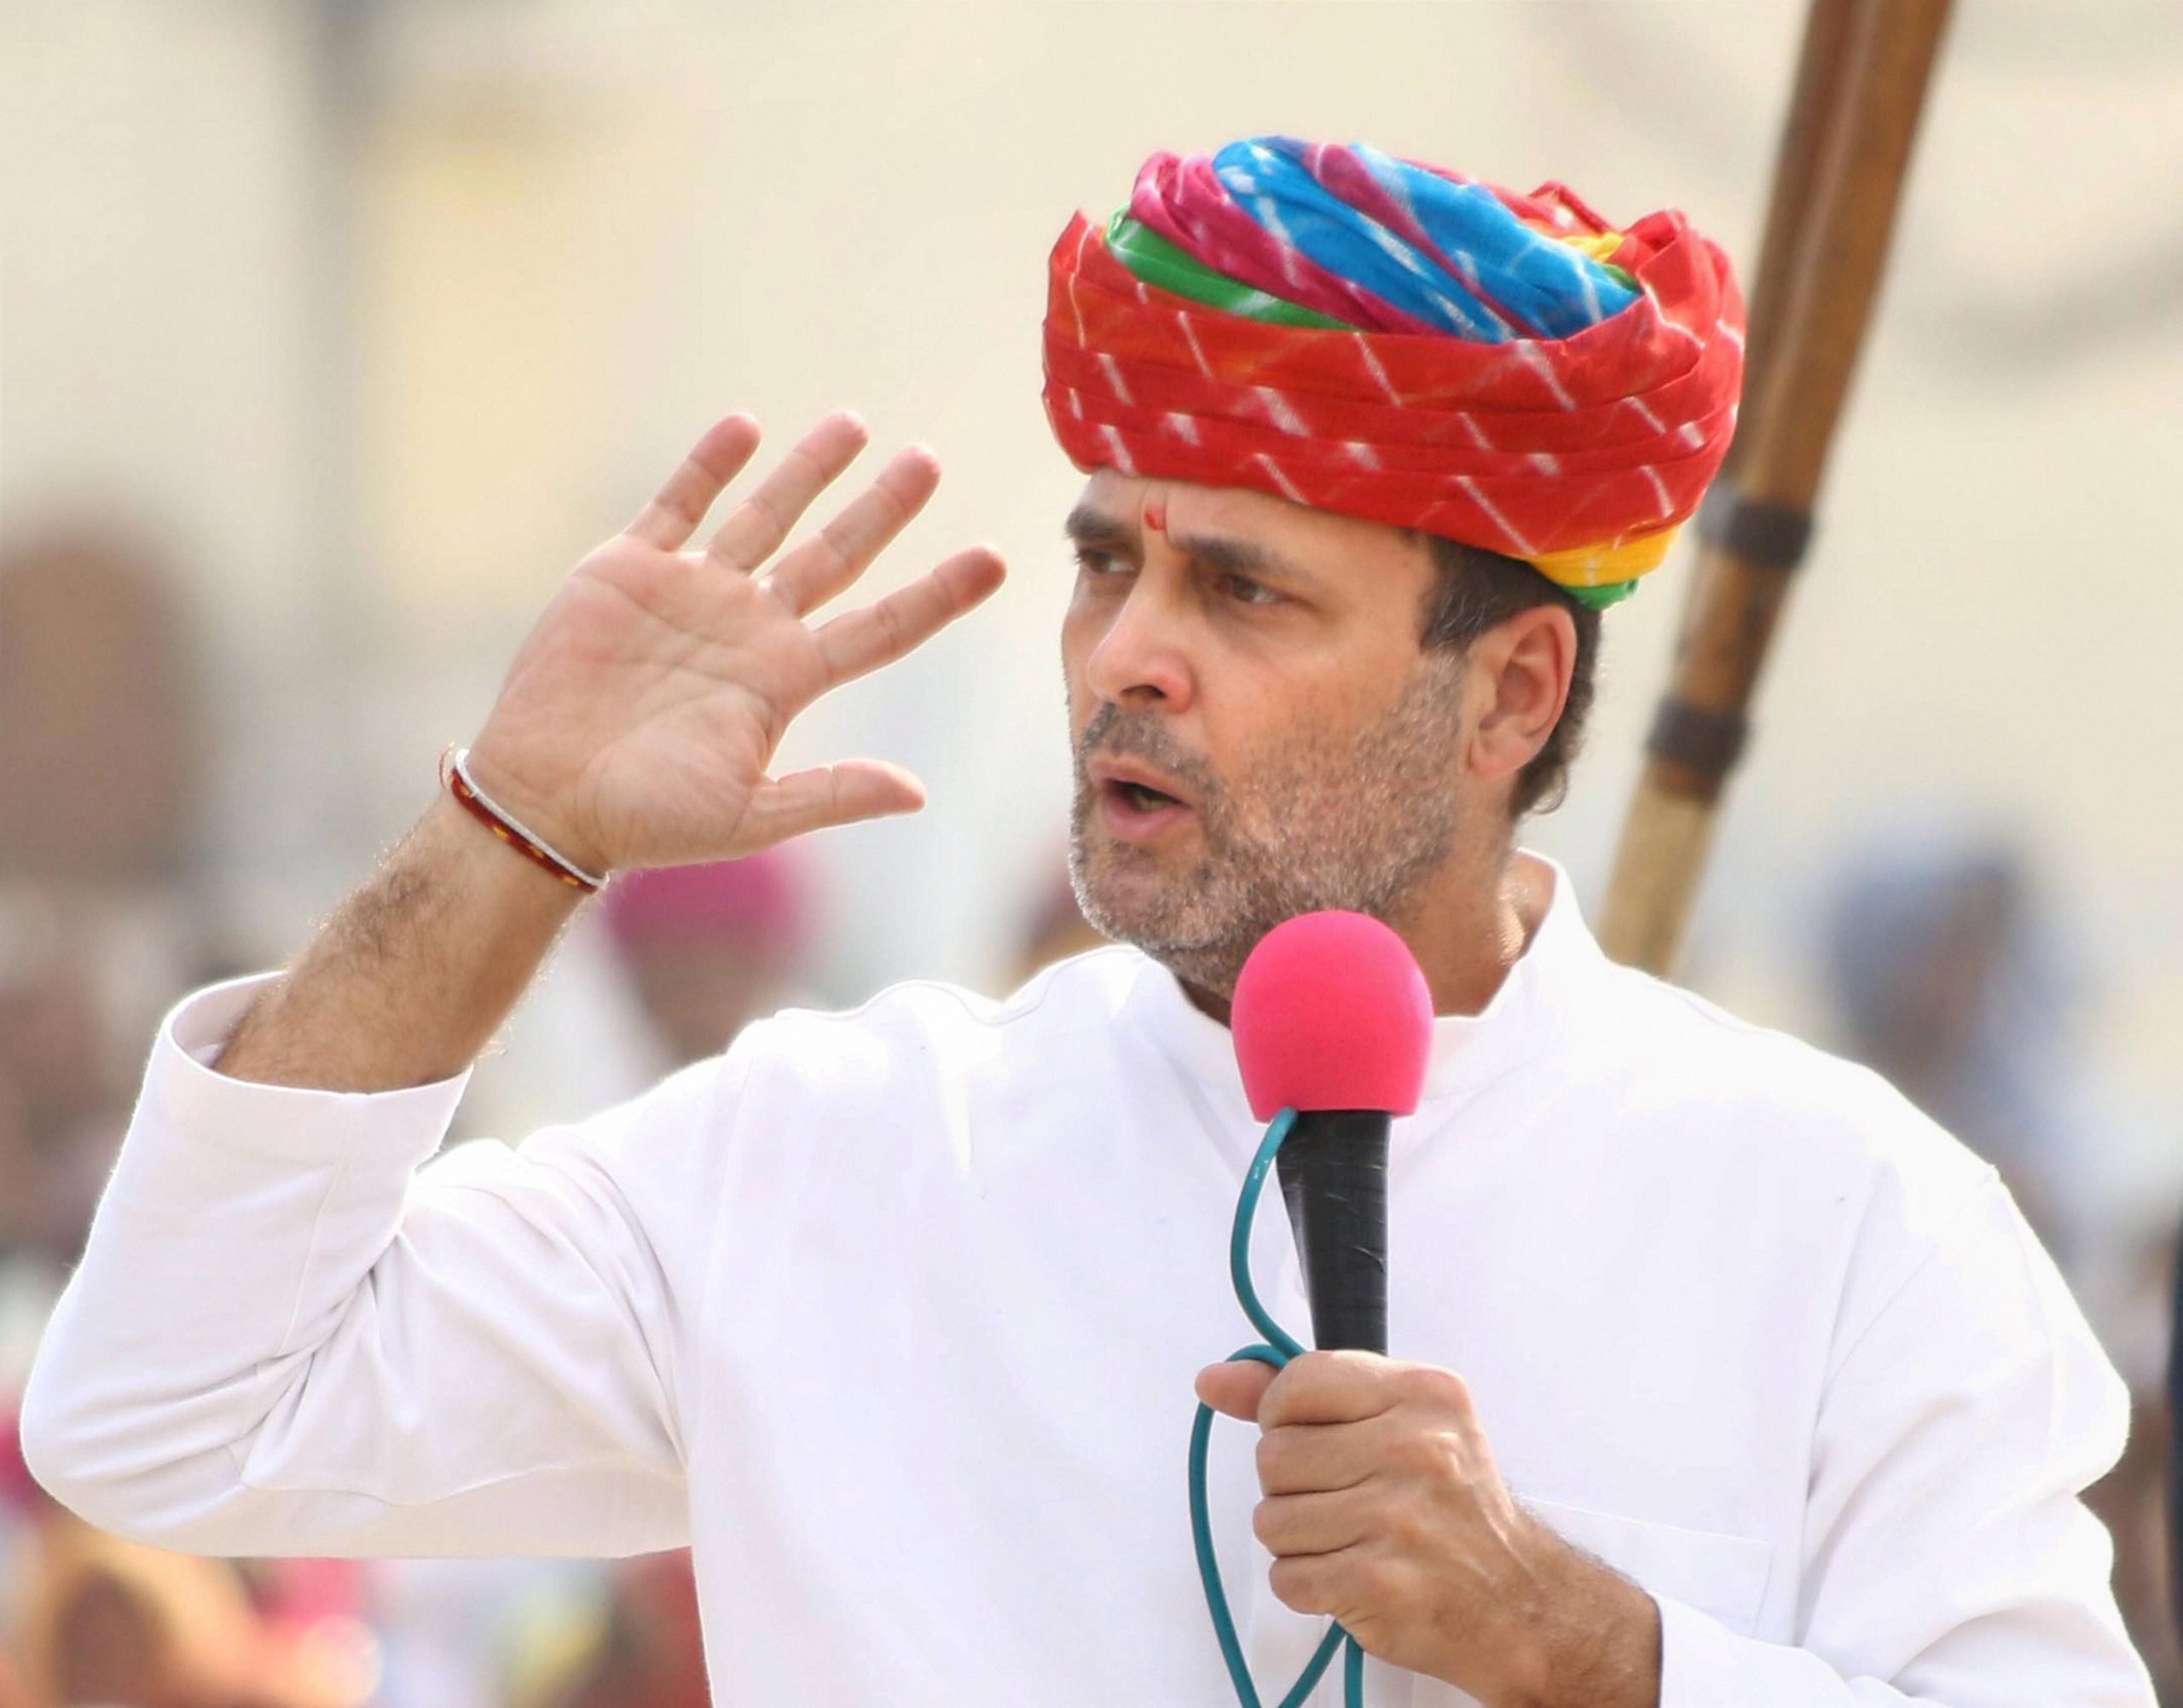 PM Modi wants to hand over agriculture to his two friends: Rahul Gandhi